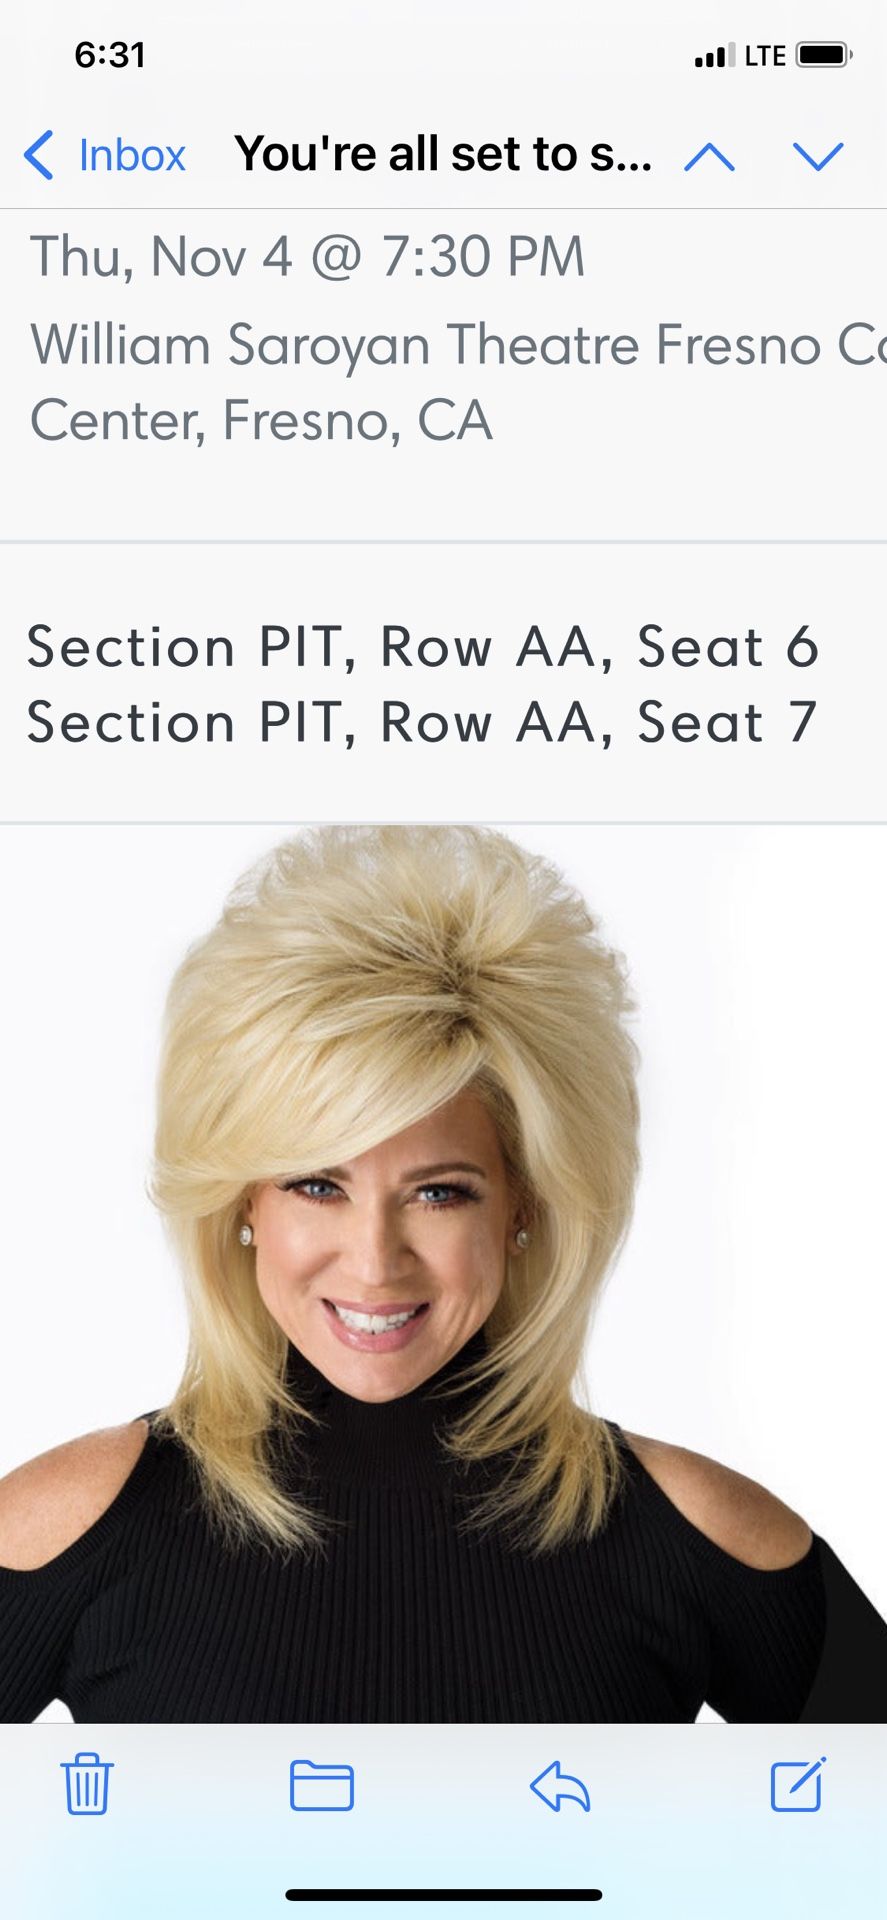 Theresa Caputo Tickets For Sale